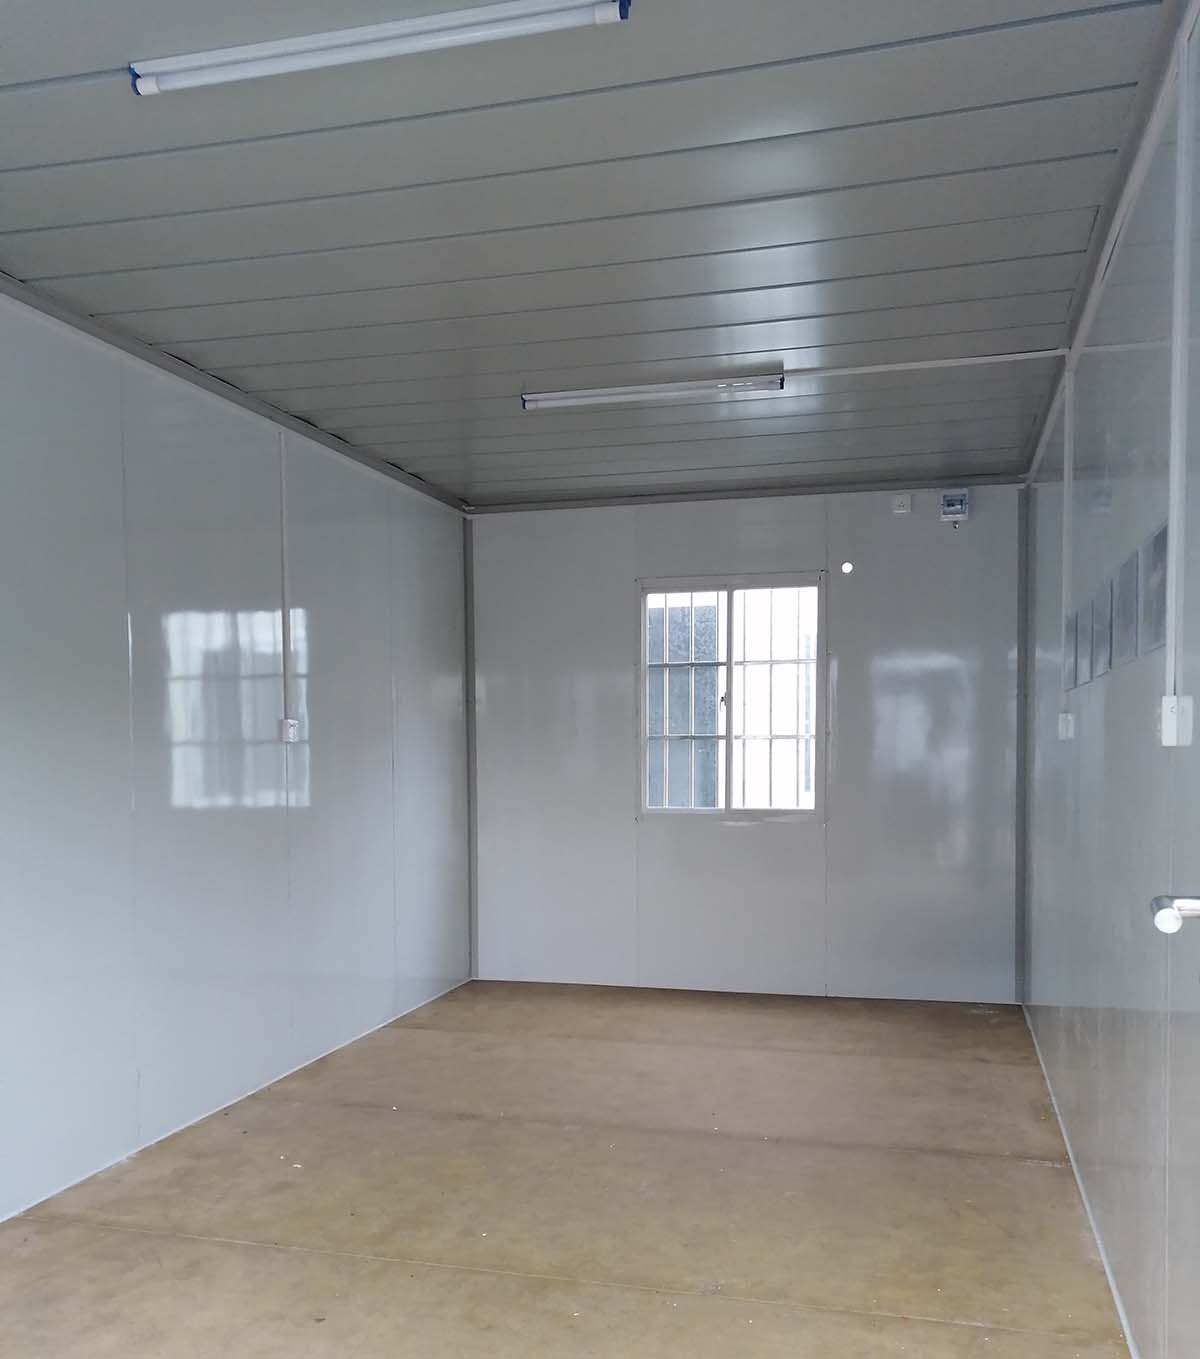 KEESSON 40ft Detachable Container House